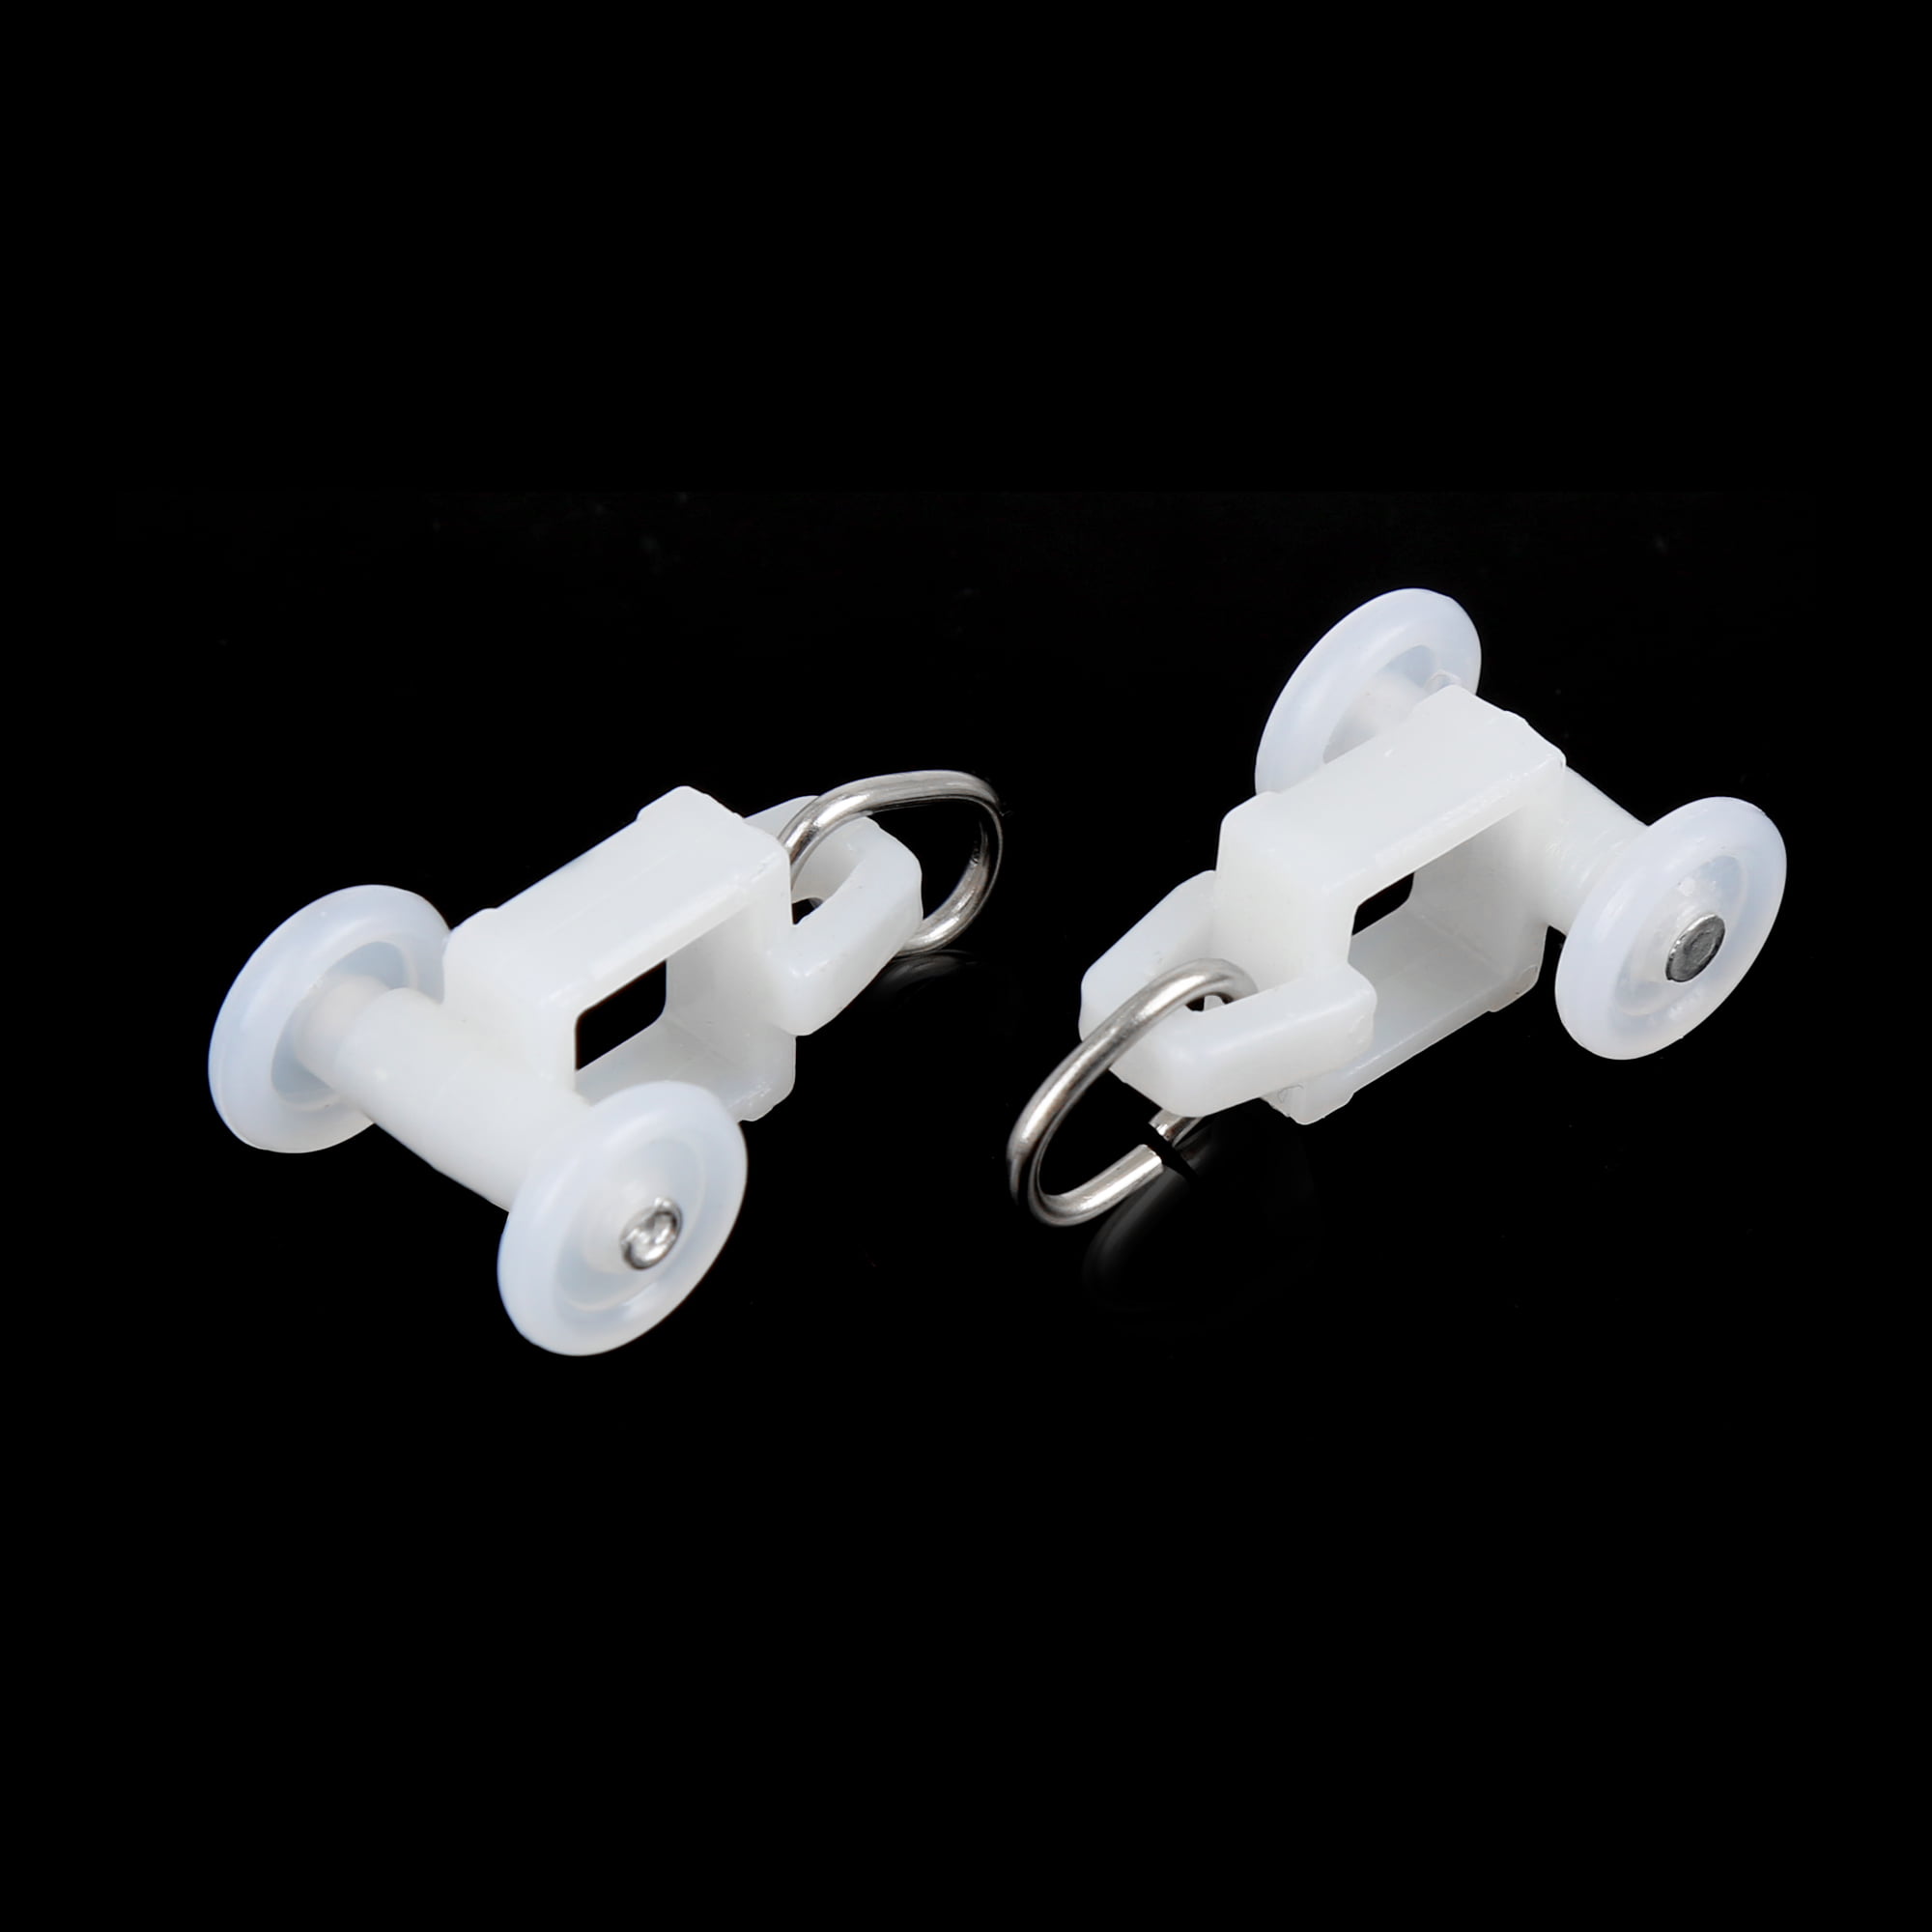 Details about   20 Pcs Plastic Curtain Track Rollers 36mm x 20mm for Car RV Caravan Motorhome 